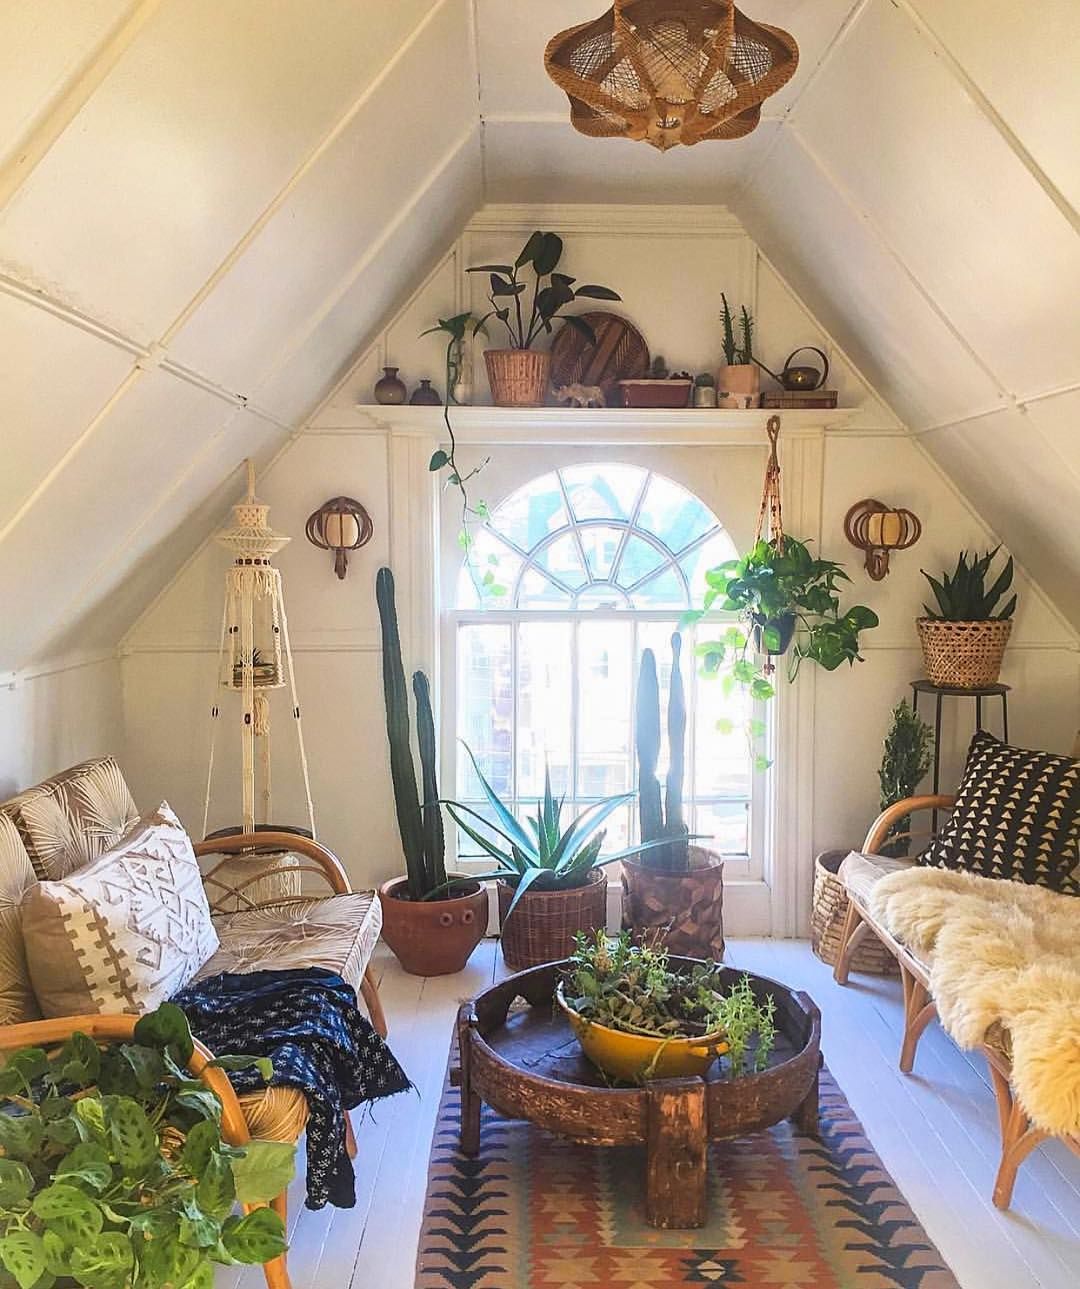 bohemian decorating ideas for living room see this instagram photo by @spirits.of.life - 14.1k likes DAMTARR